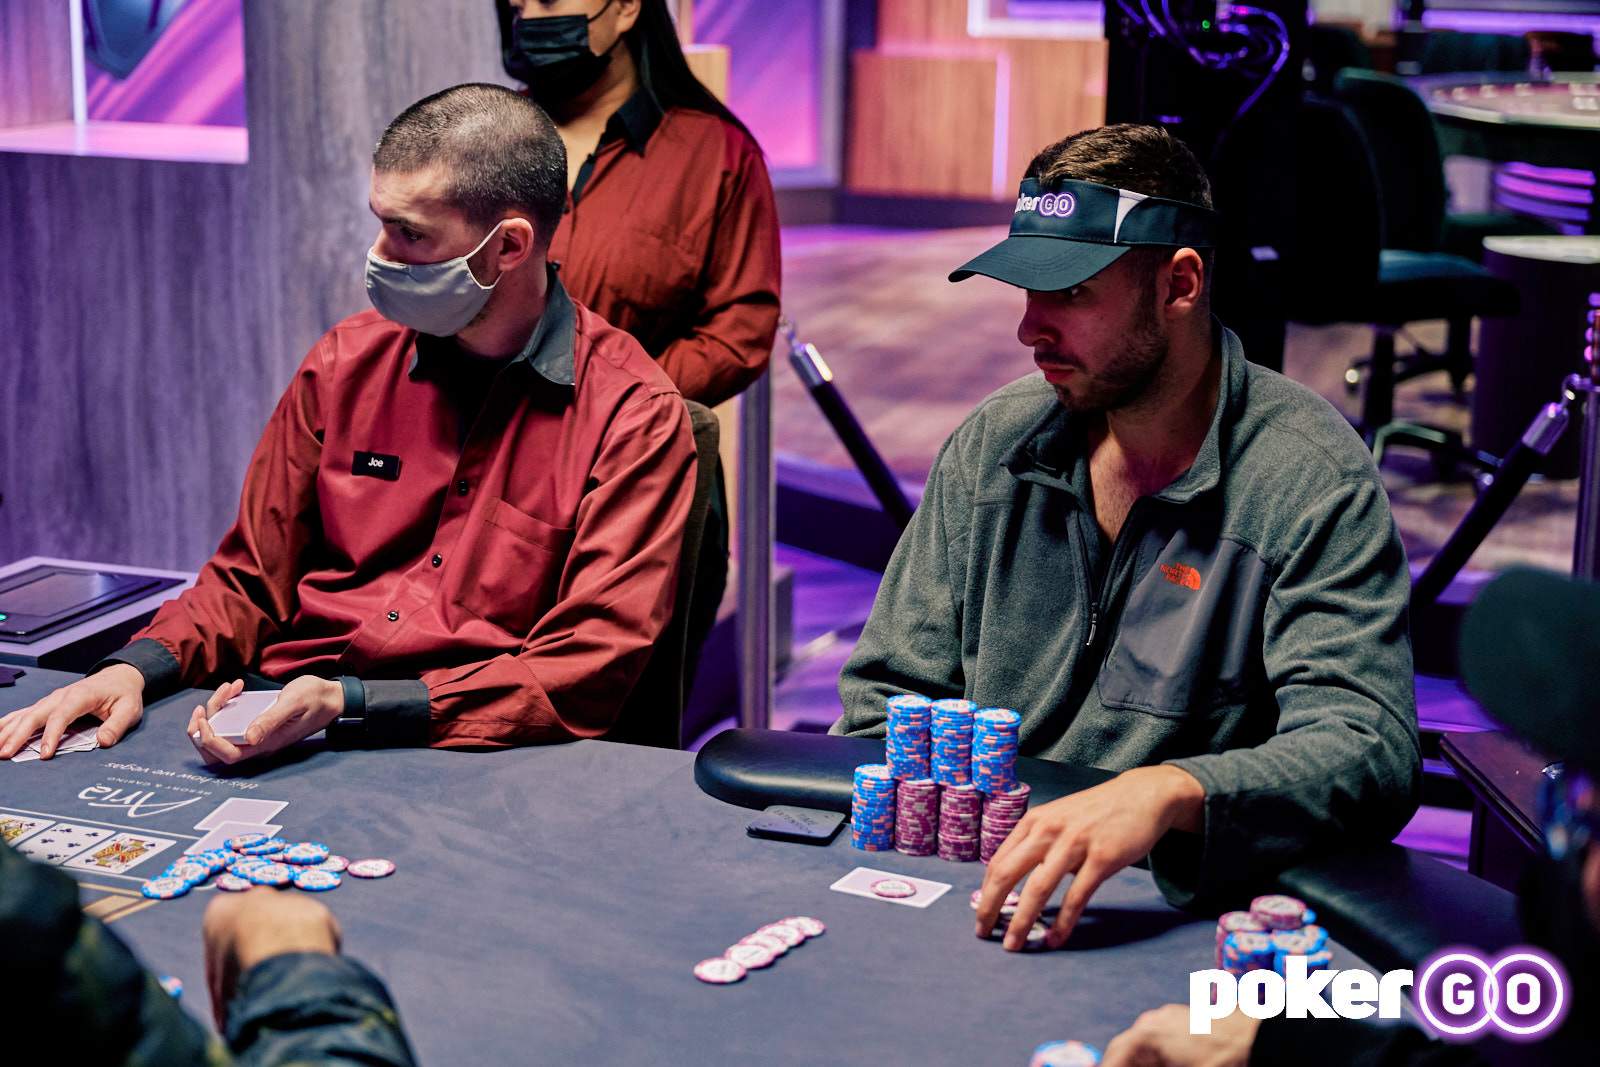 Sean Perry Leads the Final Table of Event #8: $50,000 No-Limit Hold'em. All Five Players Still in Contention for the PokerGO Cup